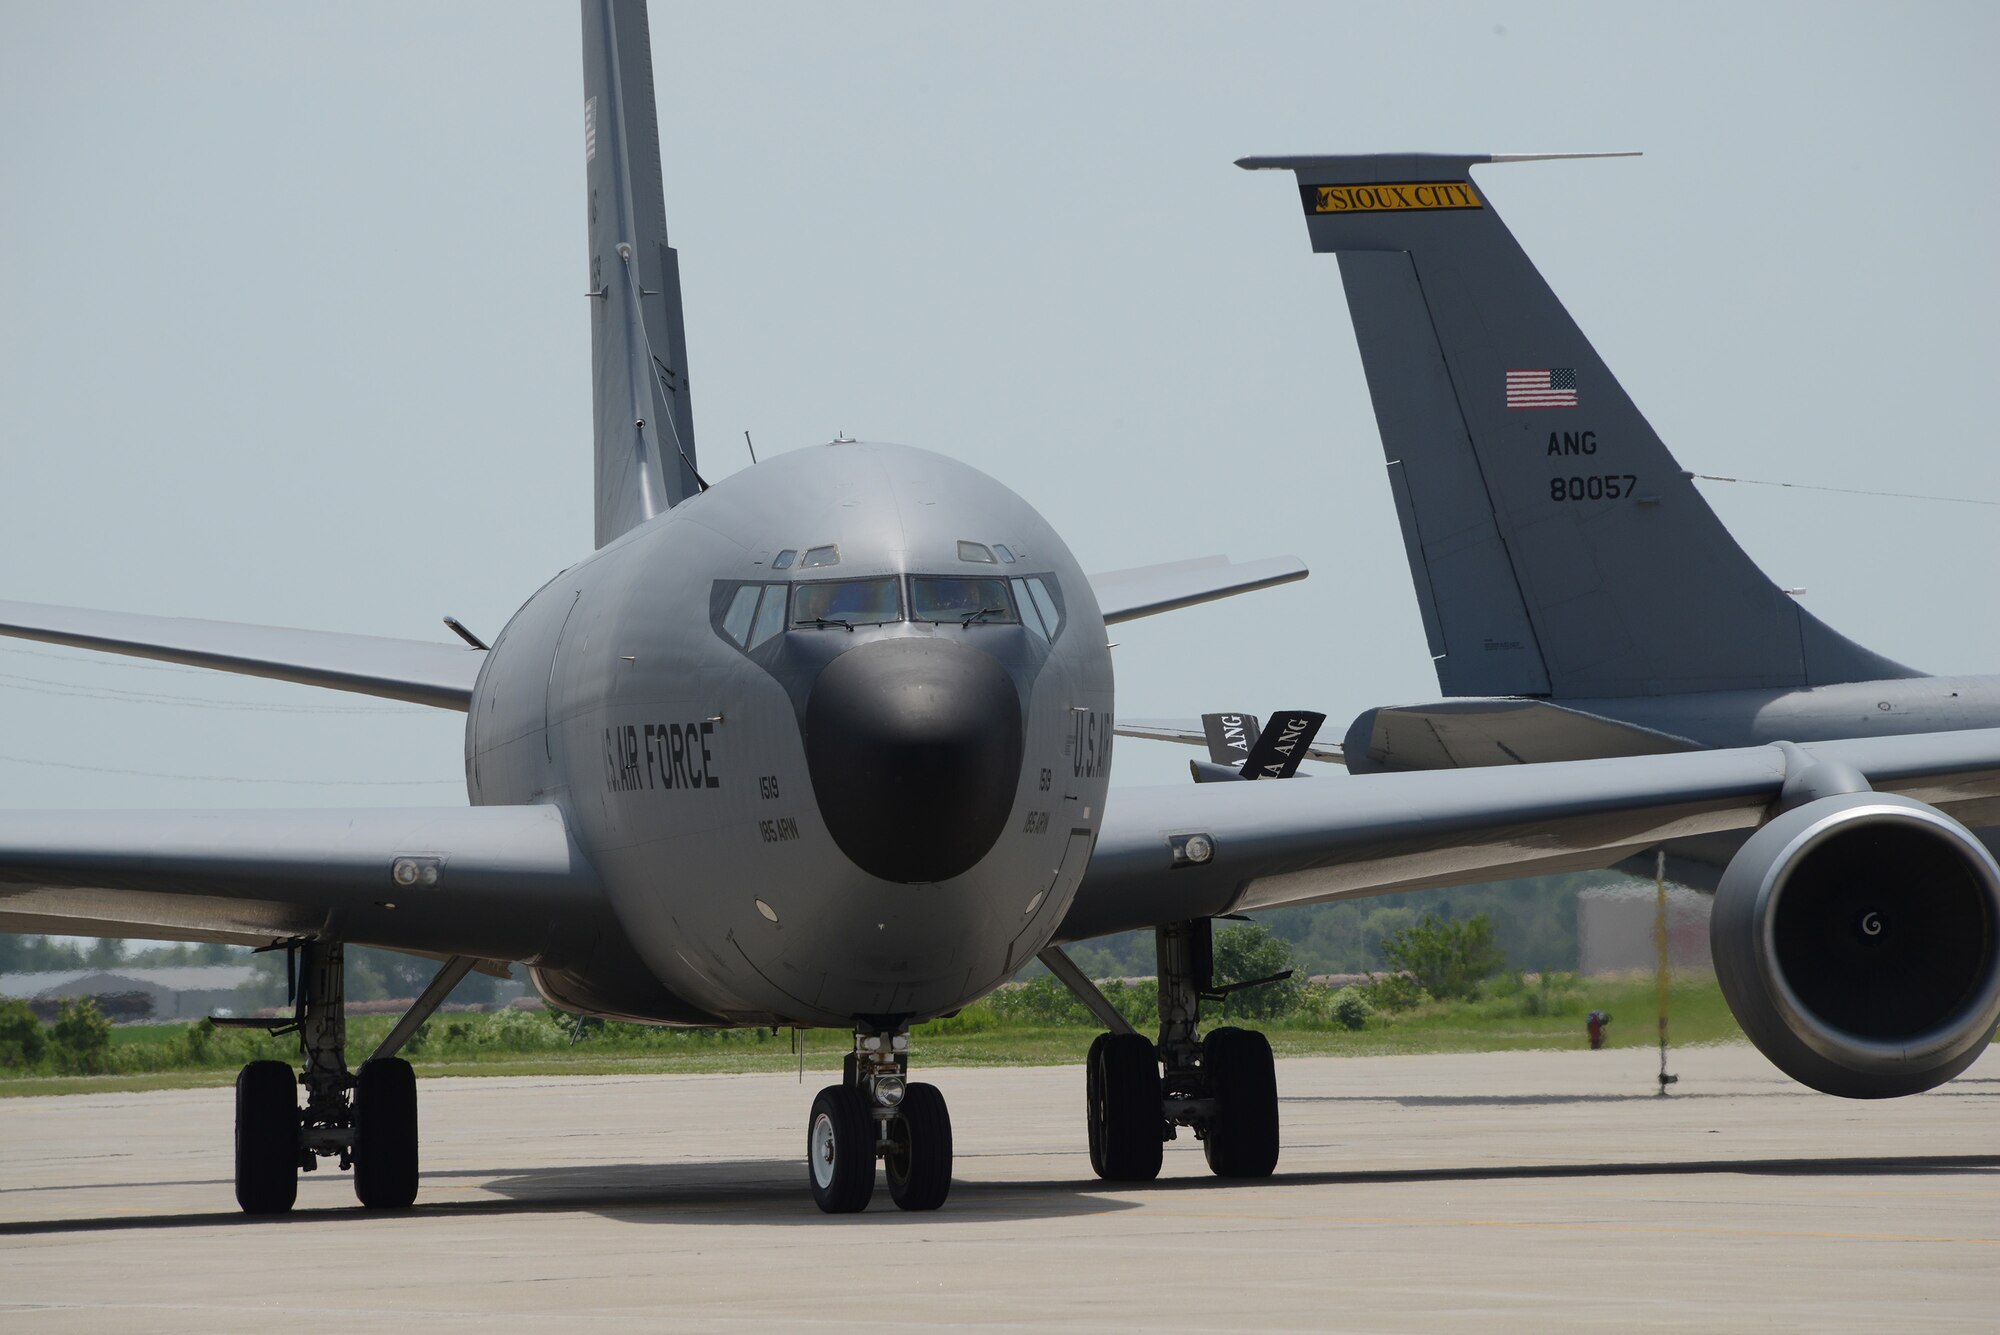 KC-135R Stratotanker, assigned to the Iowa Air National Guard’s 185th Air Refueling Wing, turns to park at the Sioux City Air National Guard base after returning home from Al Udeid Air Base on June 11, 2016. 185th ARW unit members and aircraft were temporarily assigned to the 340th Expeditionary Air Refueling Squadron at Al Udeid since February where they were providing midair refueling support for U.S. and partner nation aircraft in direct support of Operation Inherent Resolve.
(U.S. Air Guard Photo by: Master Sgt. Vincent De Groot/released) 